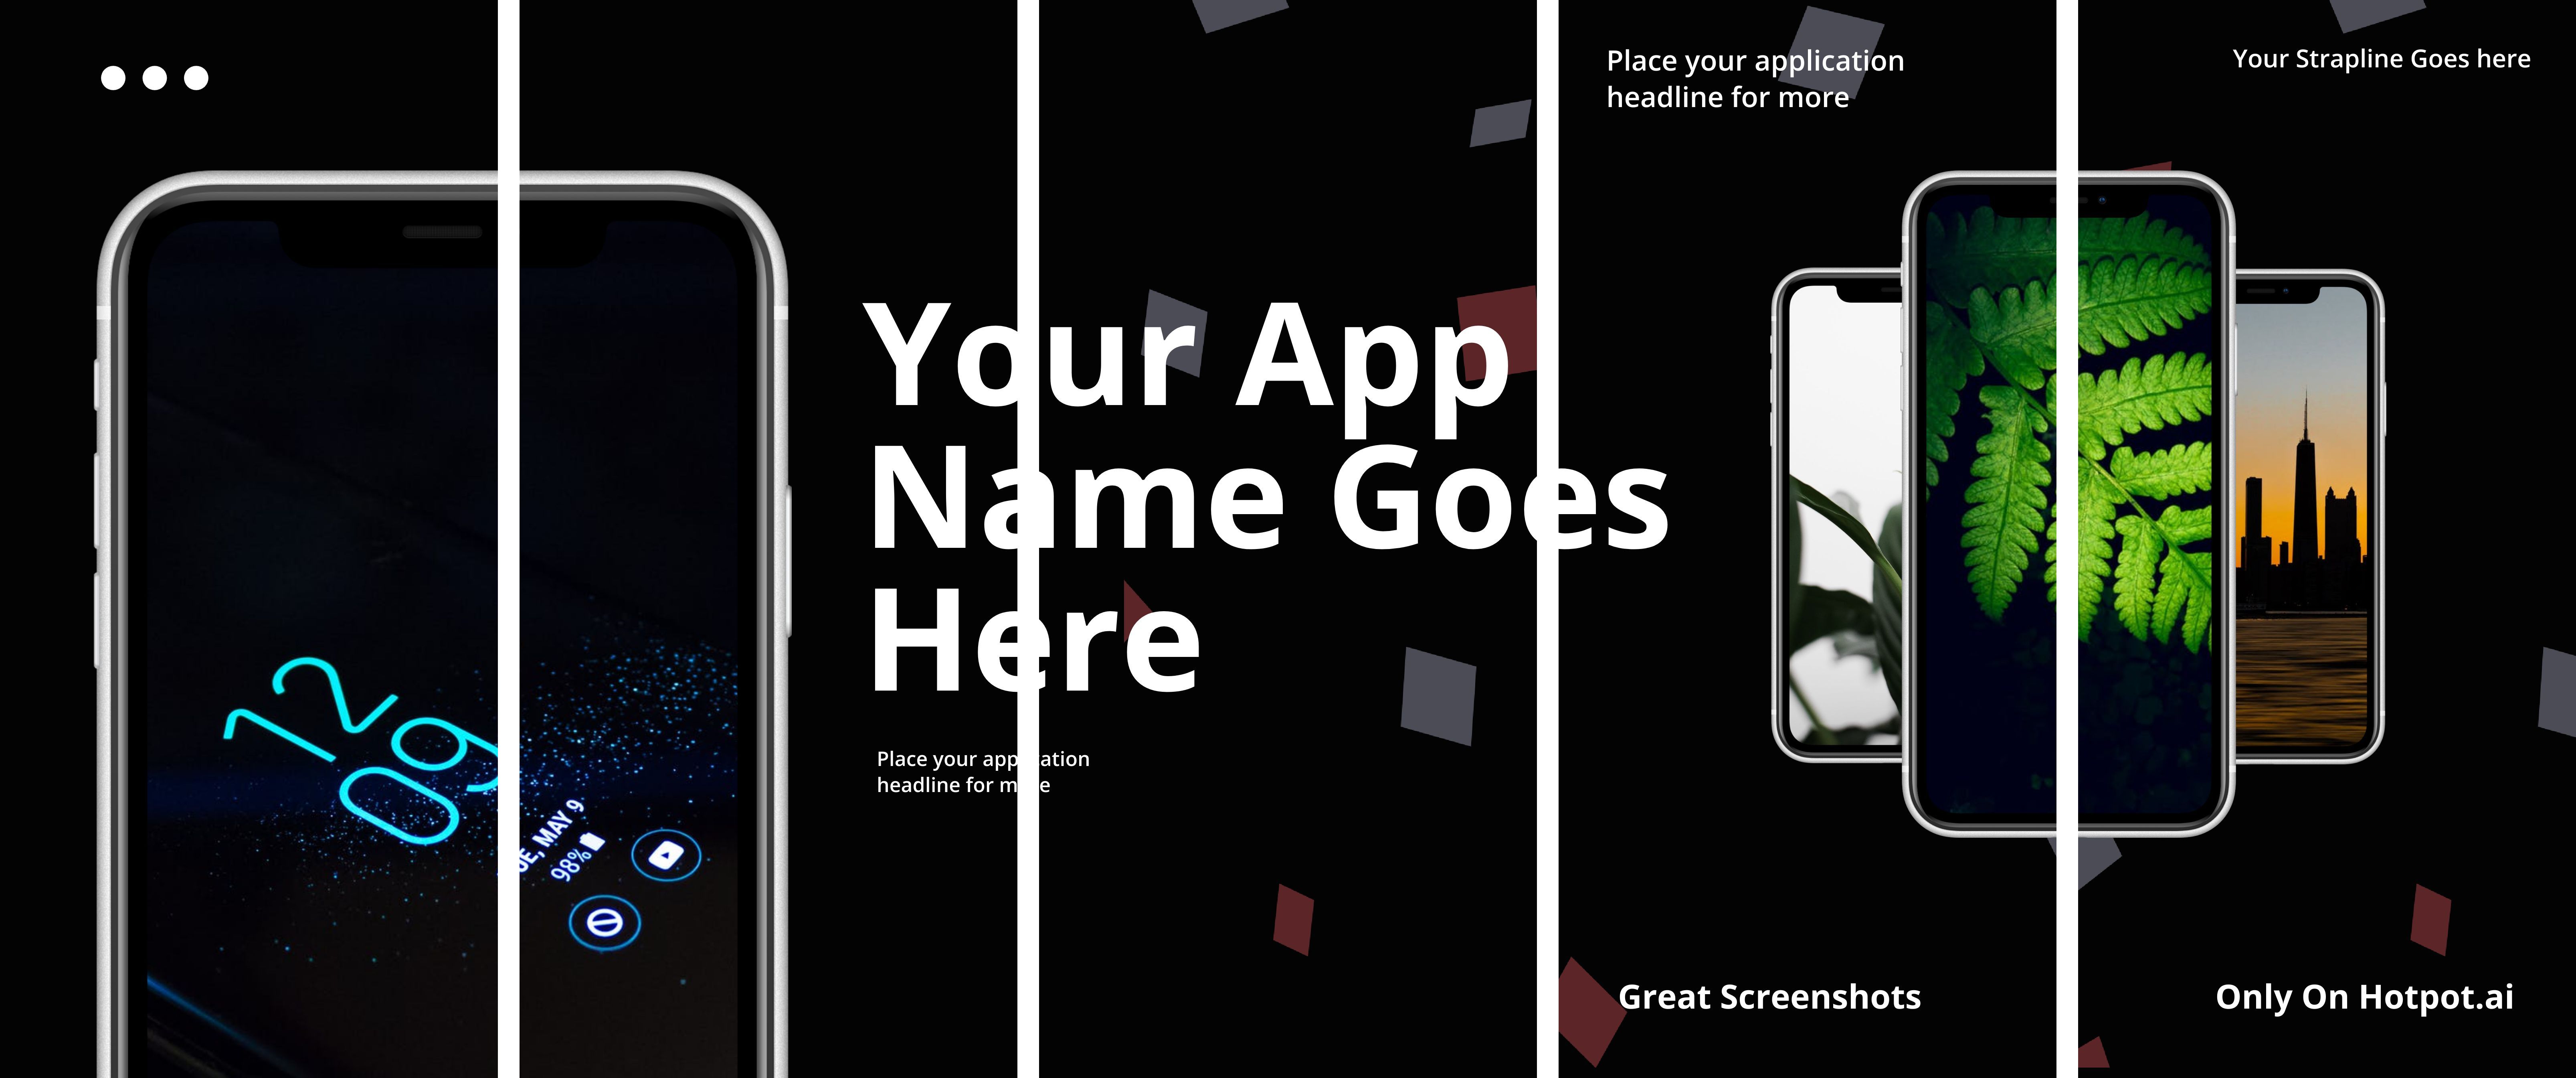 App Store Panorama Screenshot - iPhone XS Max 18 template. Quickly edit text, colors, images, and more for free.